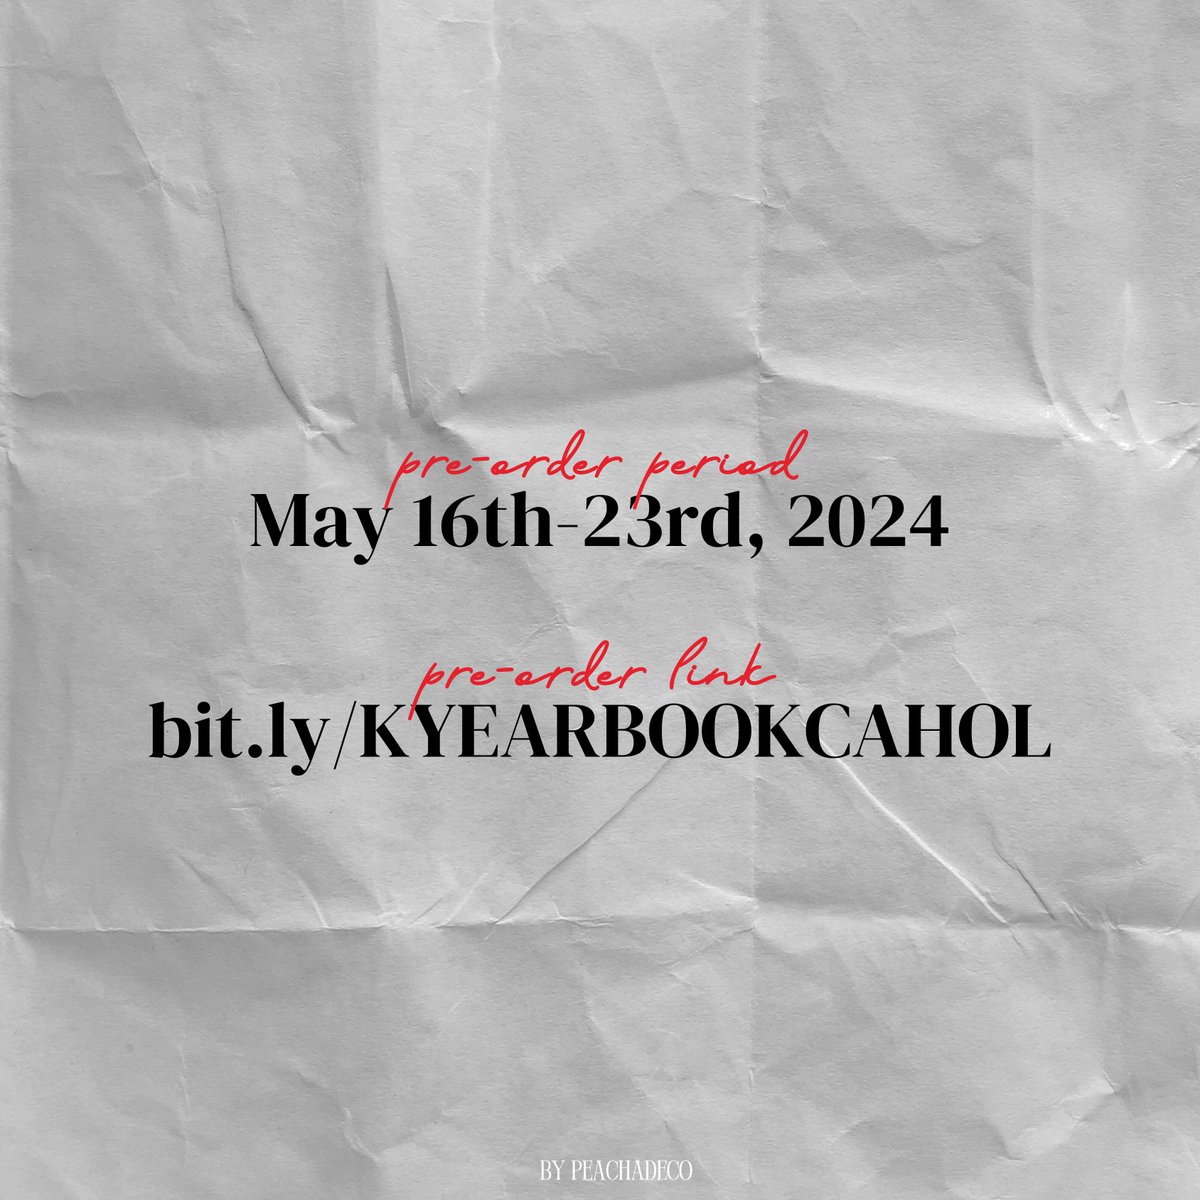 [RTs & like are appreciated]
OPEN PRE-ORDER

🩶K-YEARBOOK Photocard Holder🩶

🗓 16 - 23 Mei 2024
📍 Jakarta
📎 bit.ly/KYEARBOOKCAHOL

pricelists & more details are in the gform

tags: cahol kpop wts pc holder photocard holder 2 sisi sided double one side akrilik po